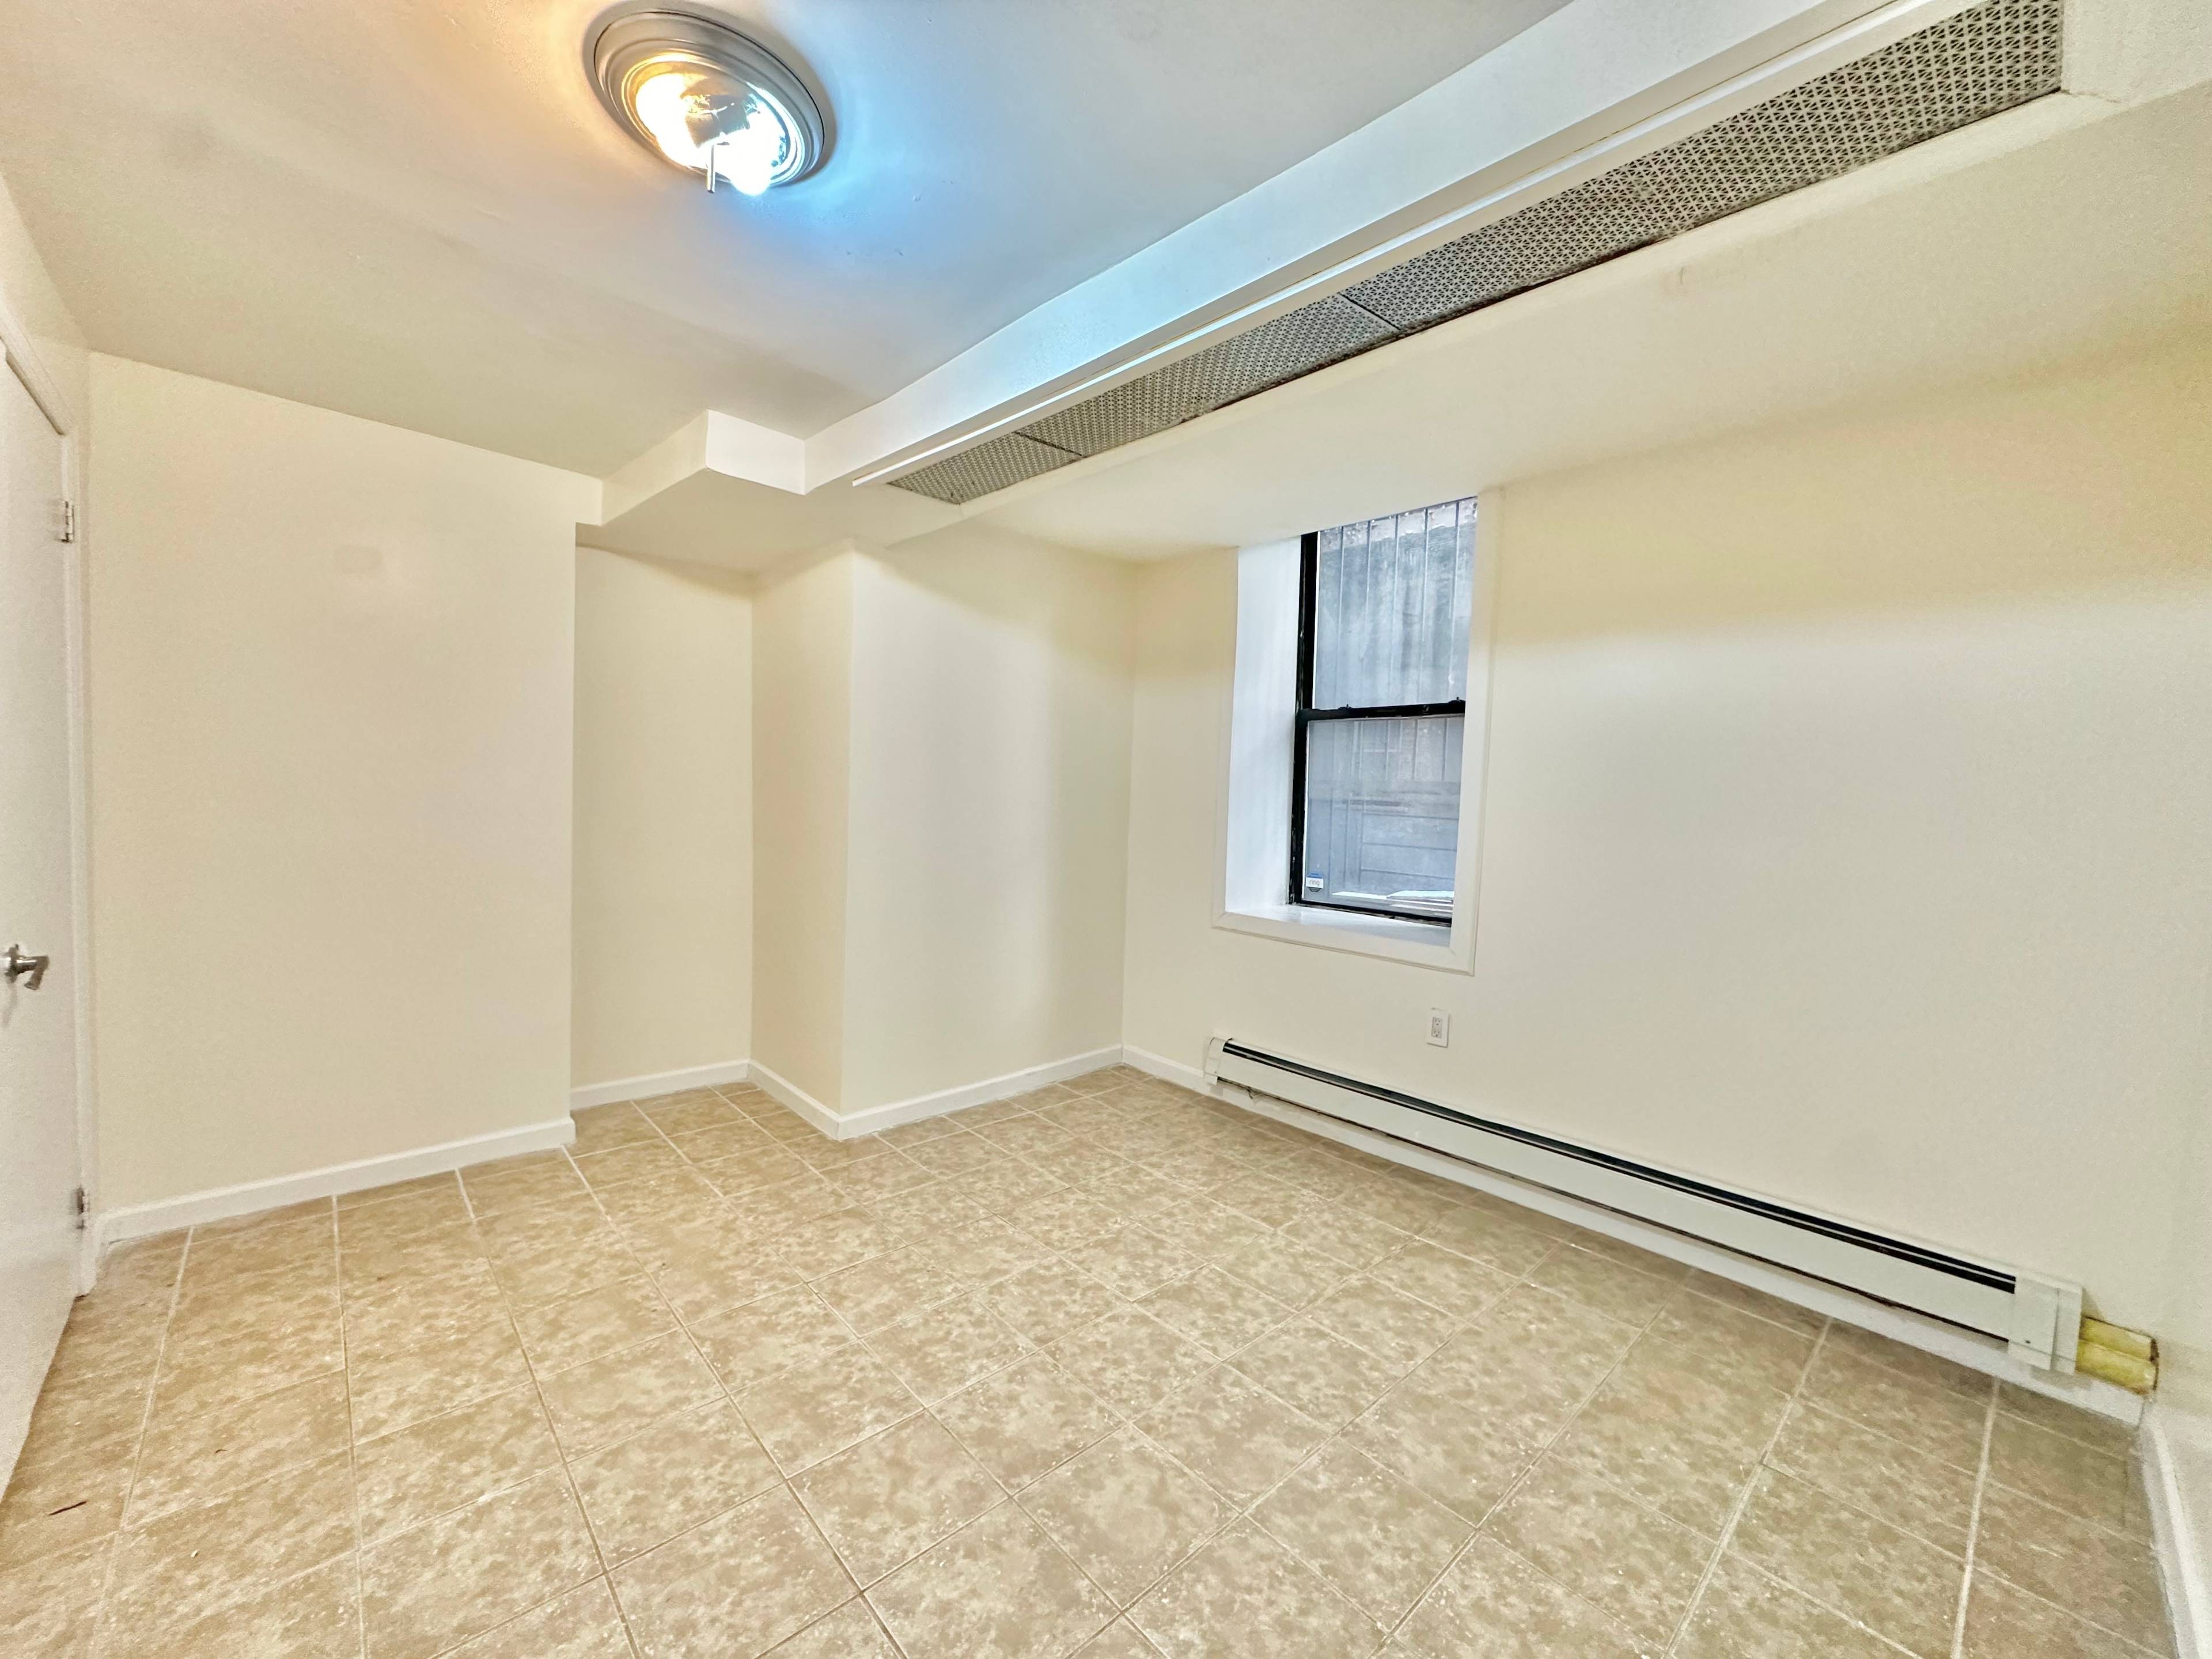 Large 4 bedroom basement apartment in Washington Heights !